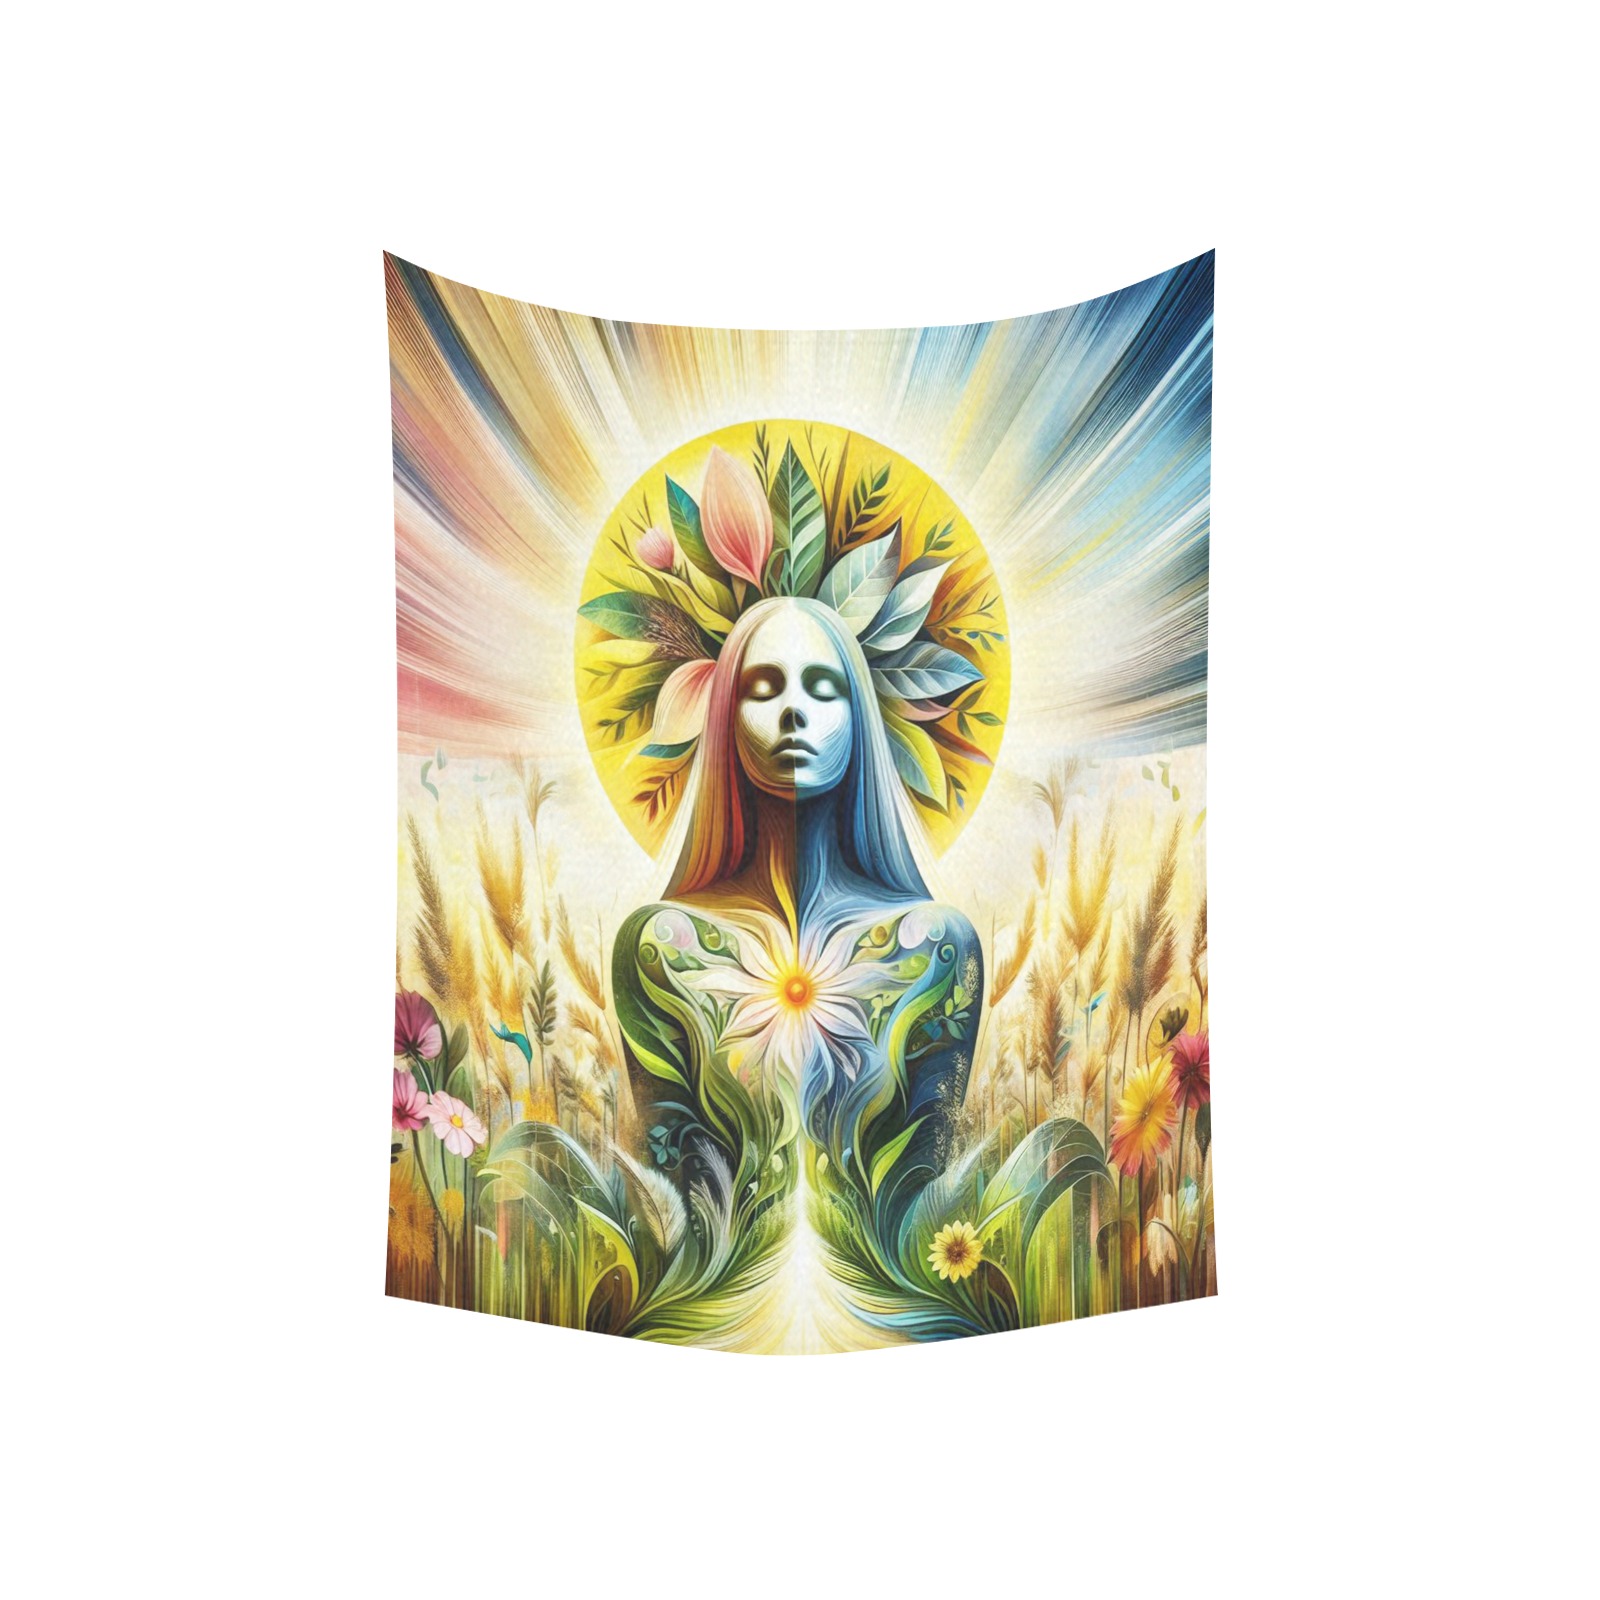 Mother Nature Cotton Linen Wall Tapestry 30"x 40"